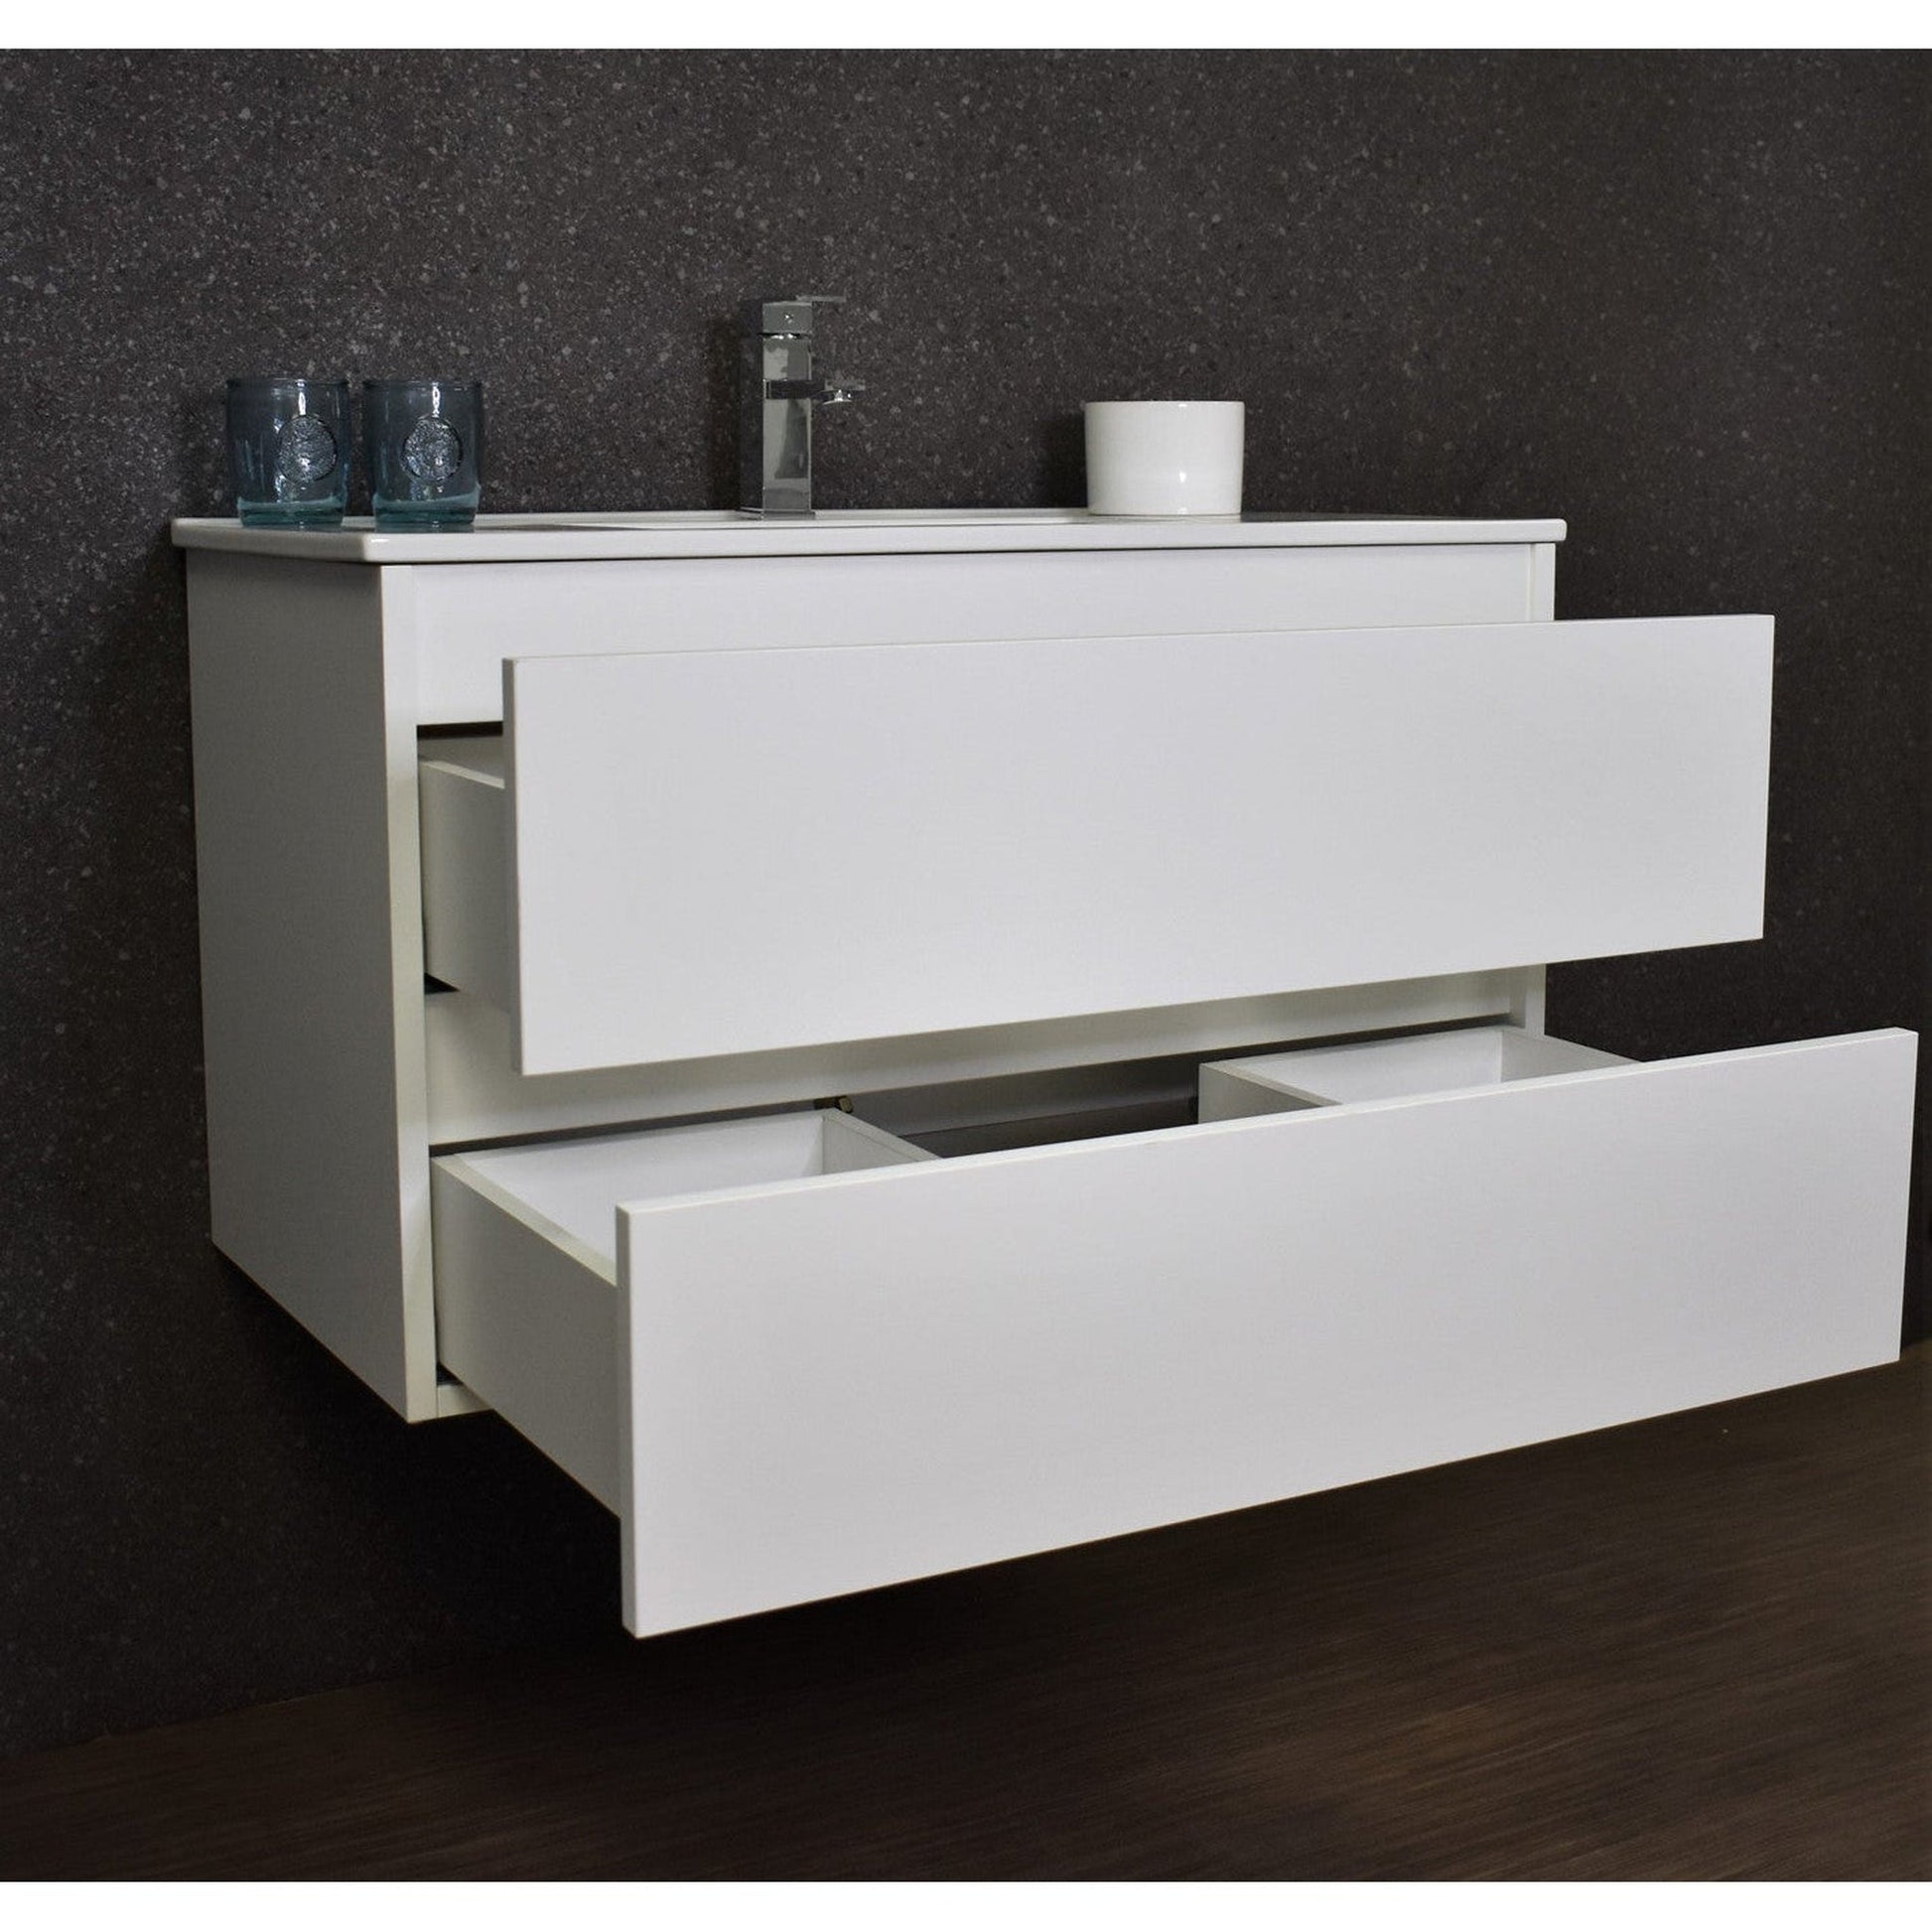 Volpa USA Salt 36" x 18" White Wall-Mounted Floating Bathroom Vanity With Drawers, Integrated Porcelain Ceramic Top and Integrated Ceramic Sink